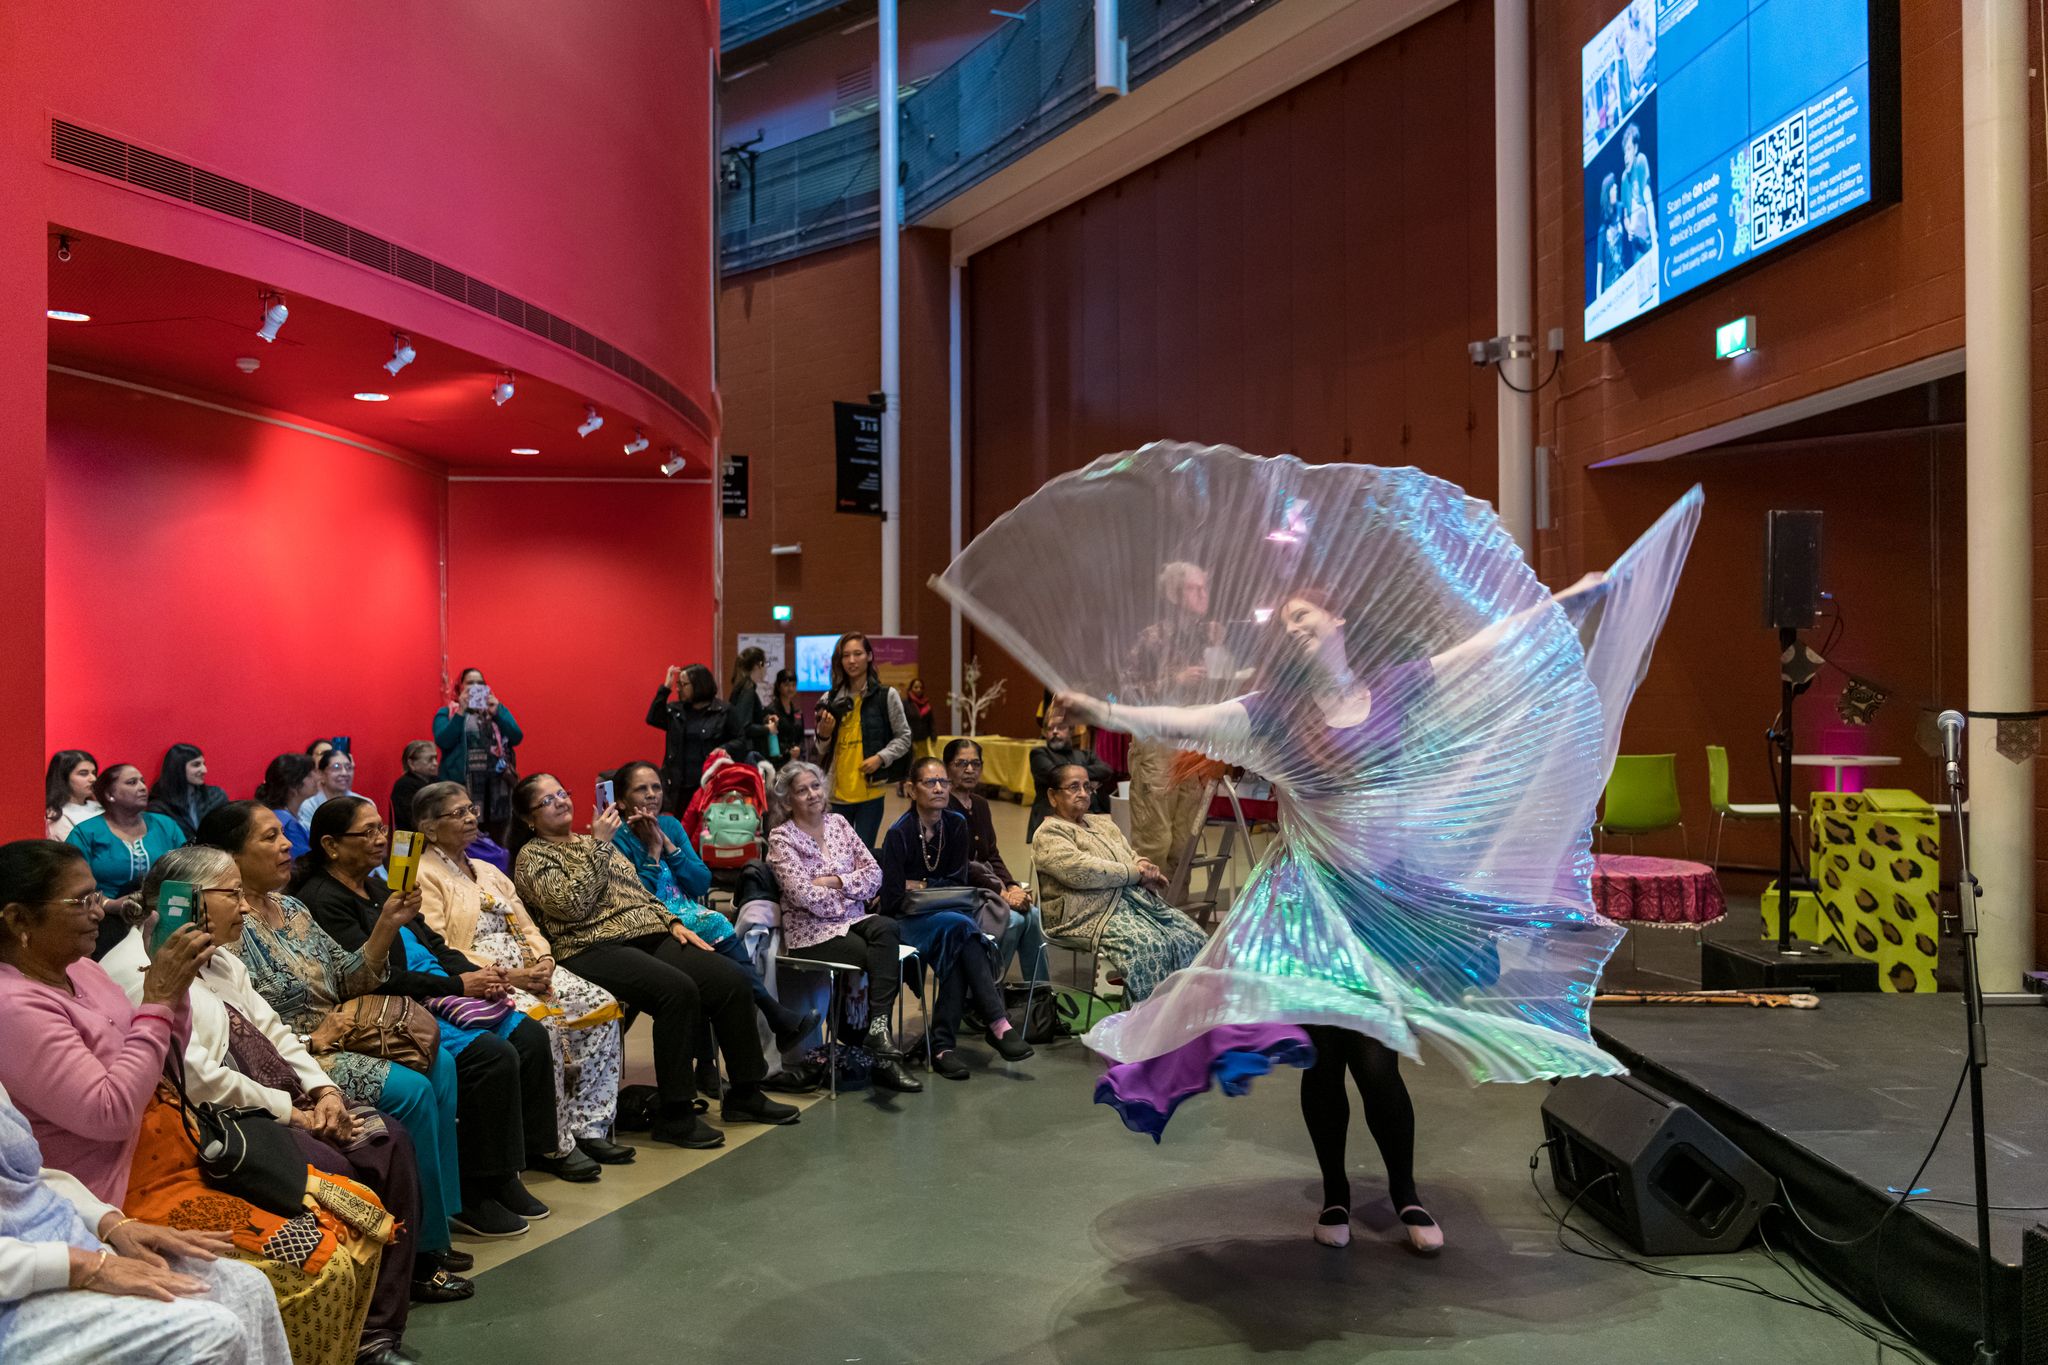 A solo dancer twirls with tulle drapes as an audience watches on.